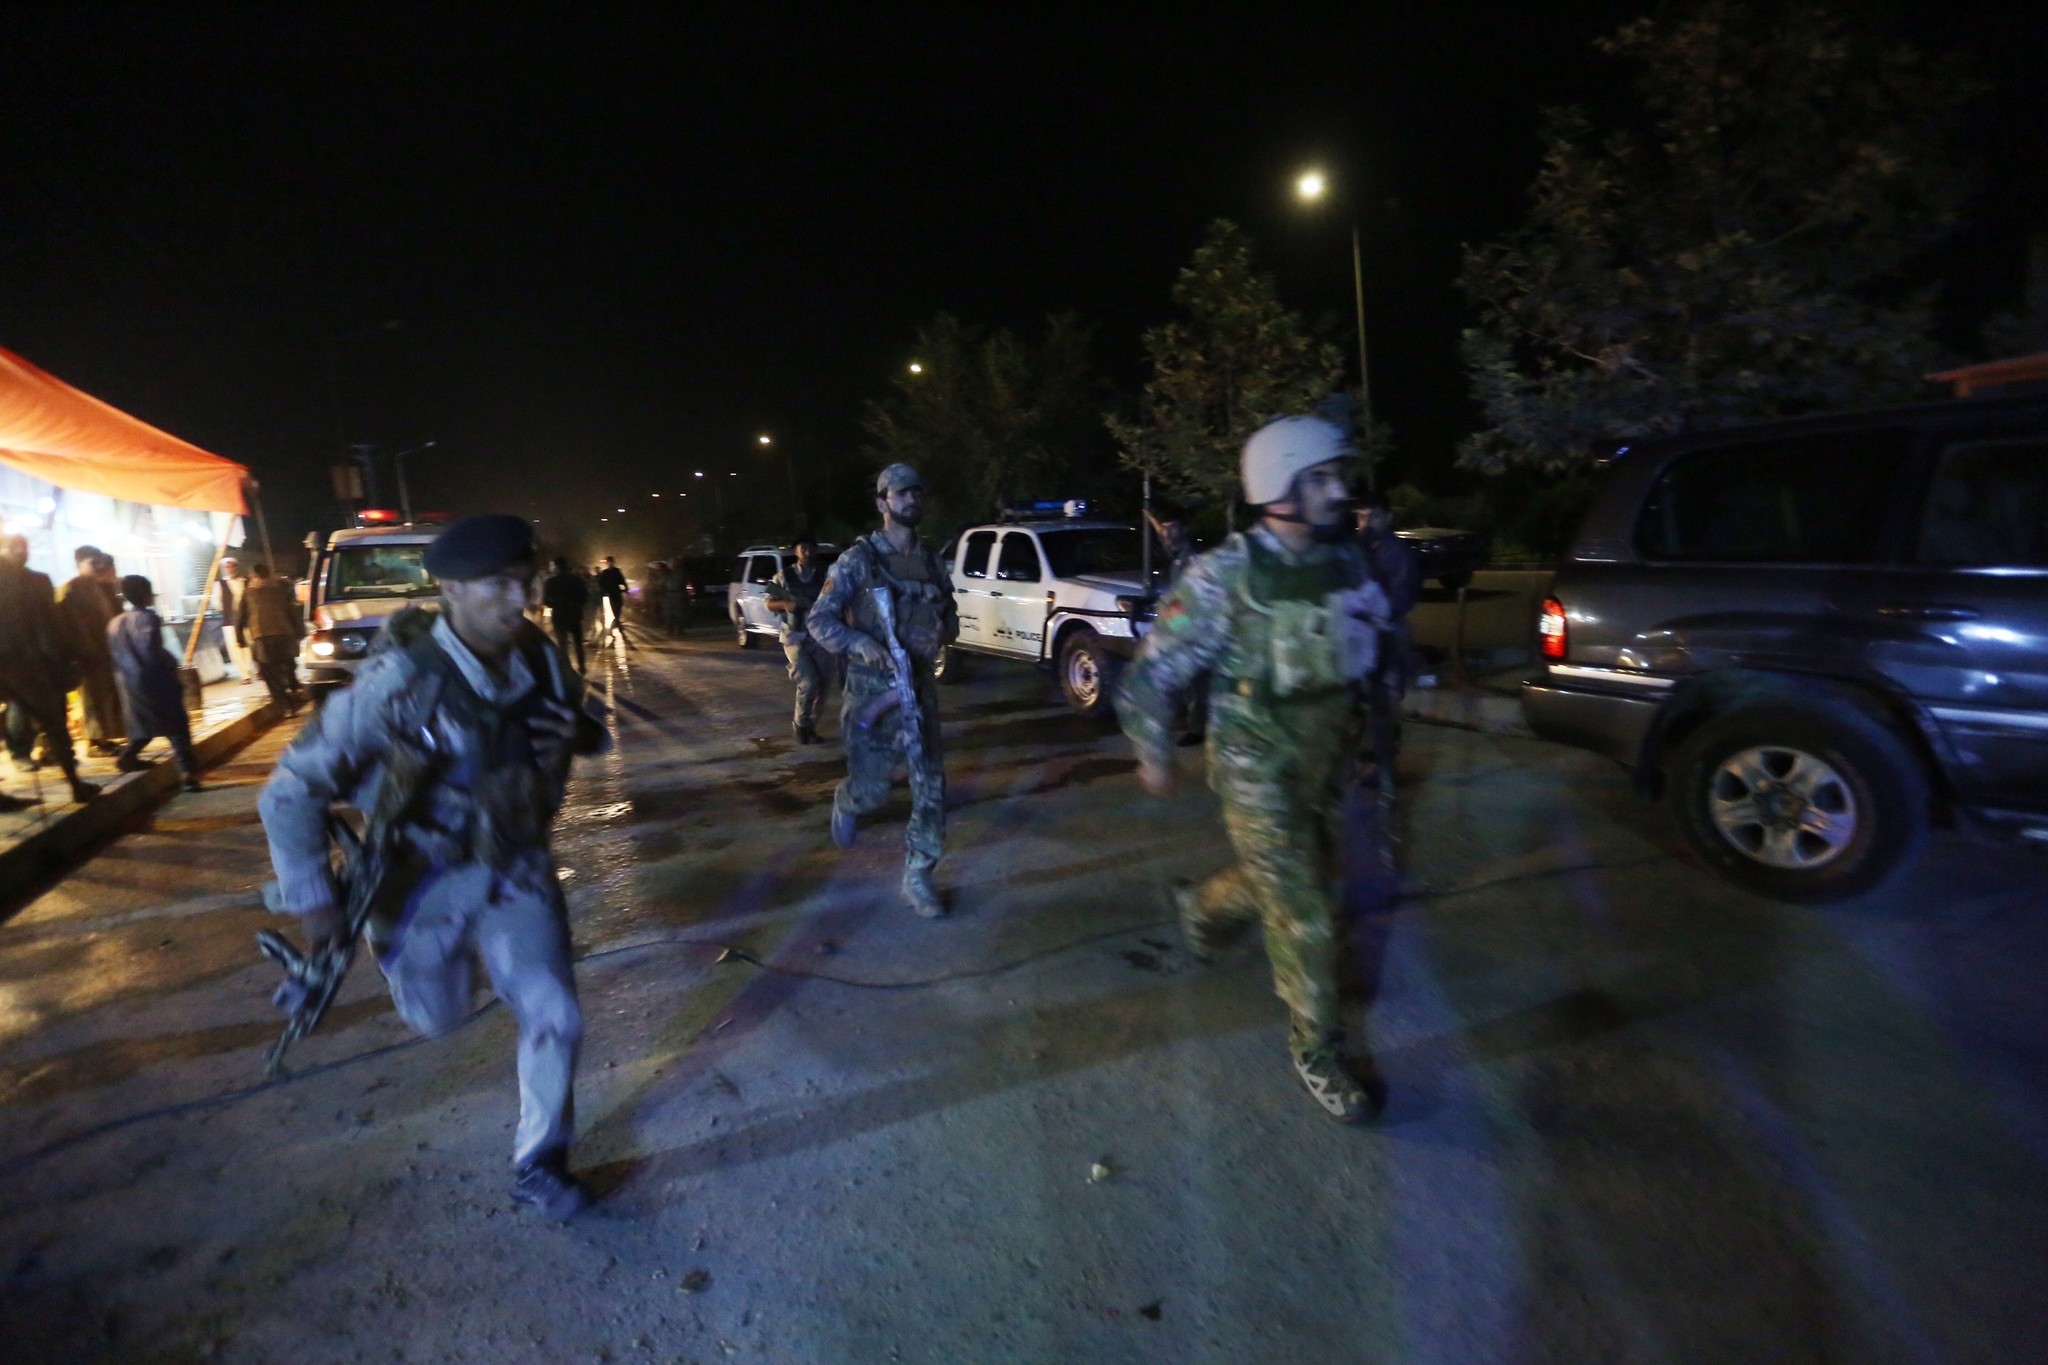 Afghan security forces rush to respond to a complex Taliban attack on the campus of the American University in the Afghan capital Kabul on Wednesday, Aug. 24, 2016. (AP Photo)